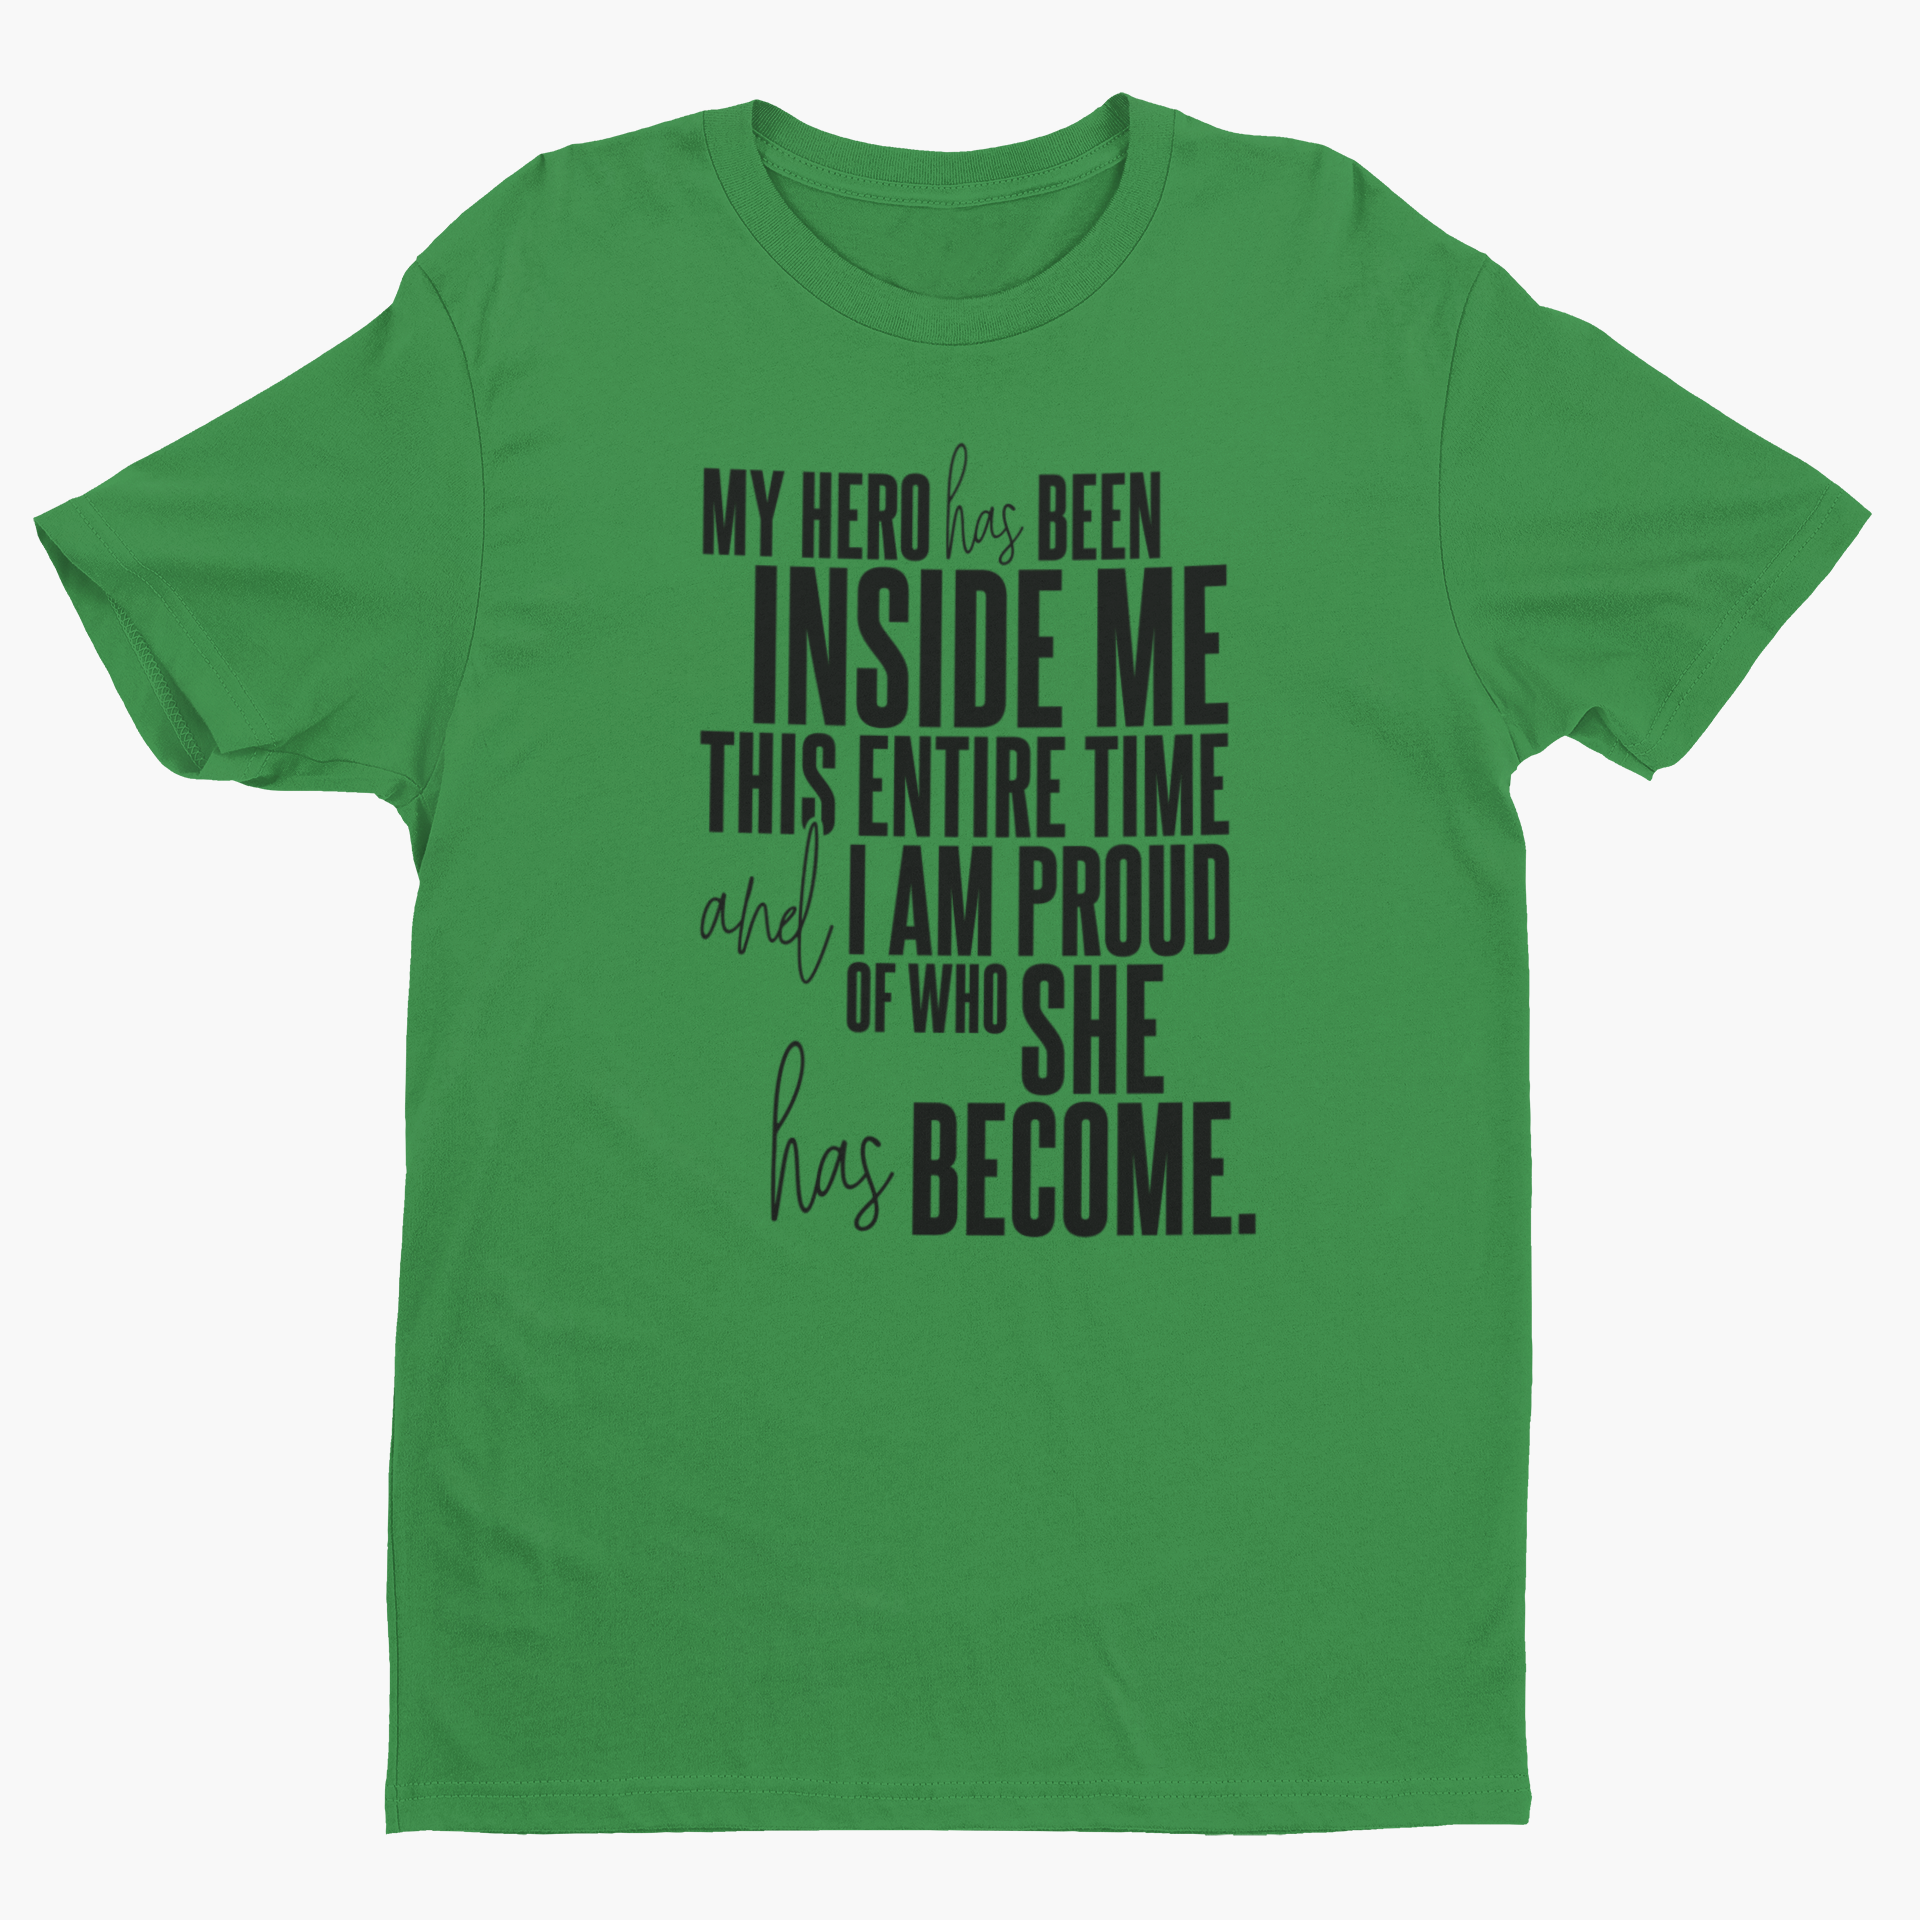 My Hero Has Been Inside Me Short Sleeve T-Shirt-clothing and culture-shop here at-A Perfect Shirt